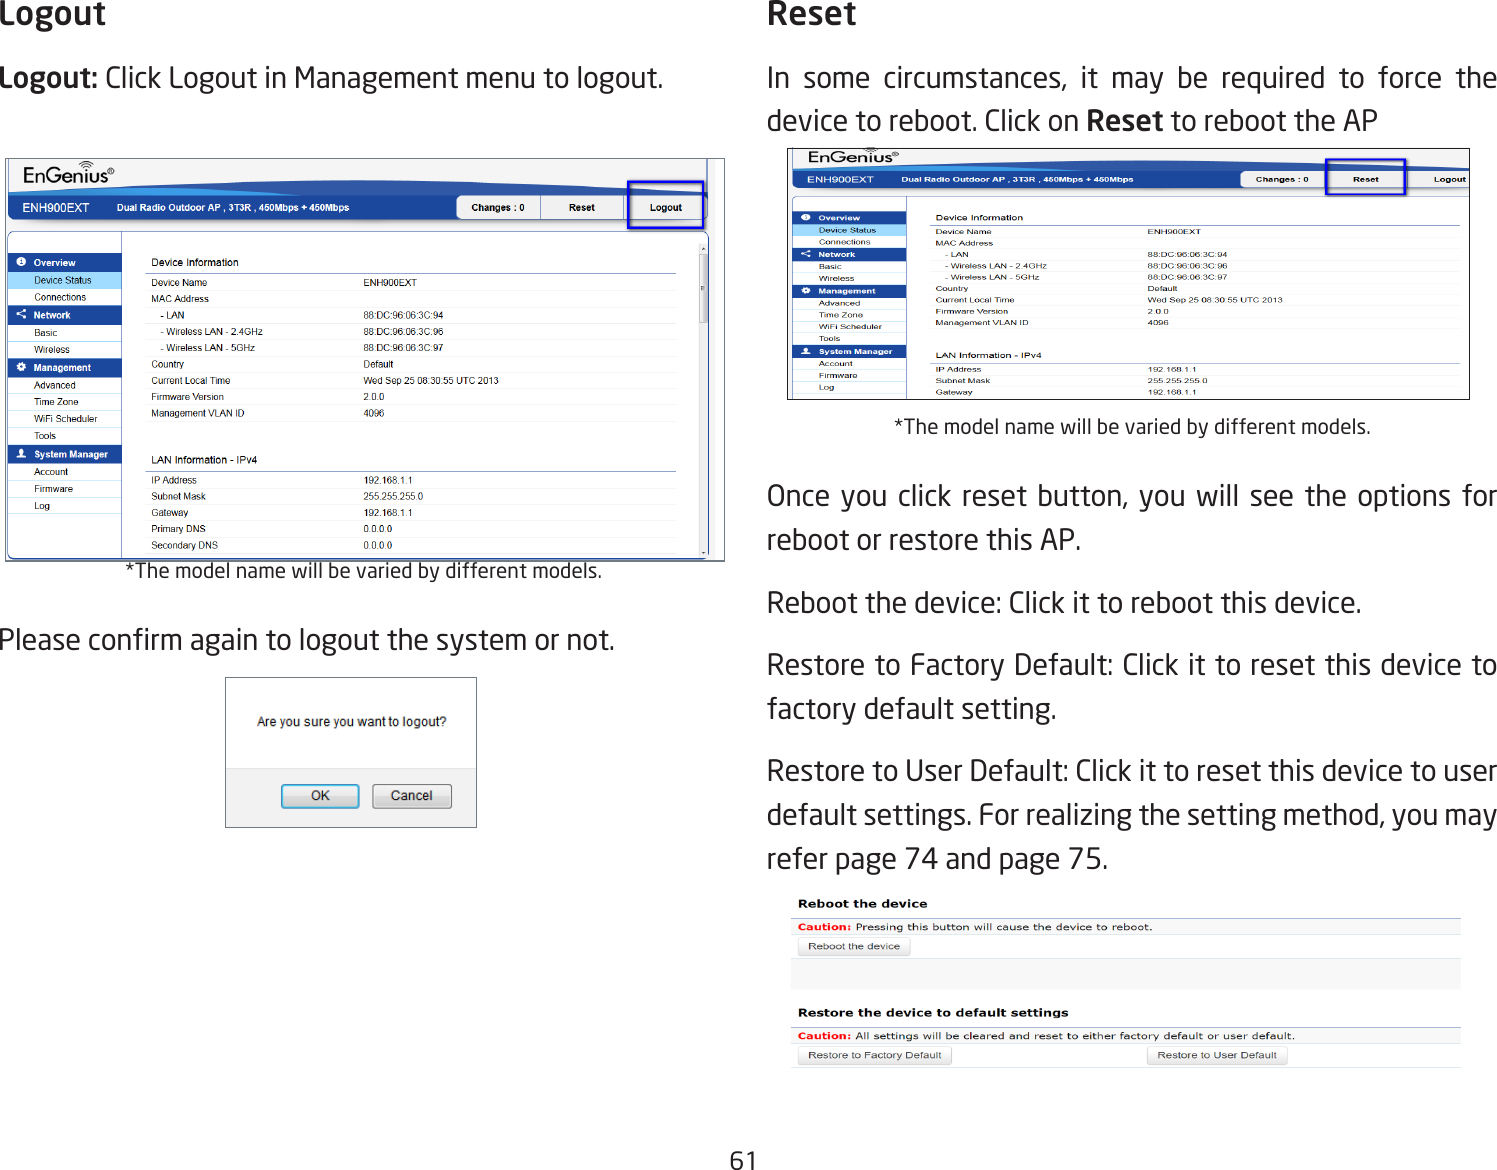 61LogoutLogout: Click Logout in Management menu to logout.*The model name will be varied by different models.Please conrm again to logout the system or not.ResetIn some circumstances, it may be required to force the device to reboot. Click on Reset to reboot the AP*The model name will be varied by different models.Once you click reset button, you will see the options for reboot or restore this AP.Reboot the device: Click it to reboot this device.Restore to Factory Default: Click it to reset this device to factory default setting. Restore to User Default: Click it to reset this device to user default settings. For realizing the setting method, you may refer page 74 and page 75.